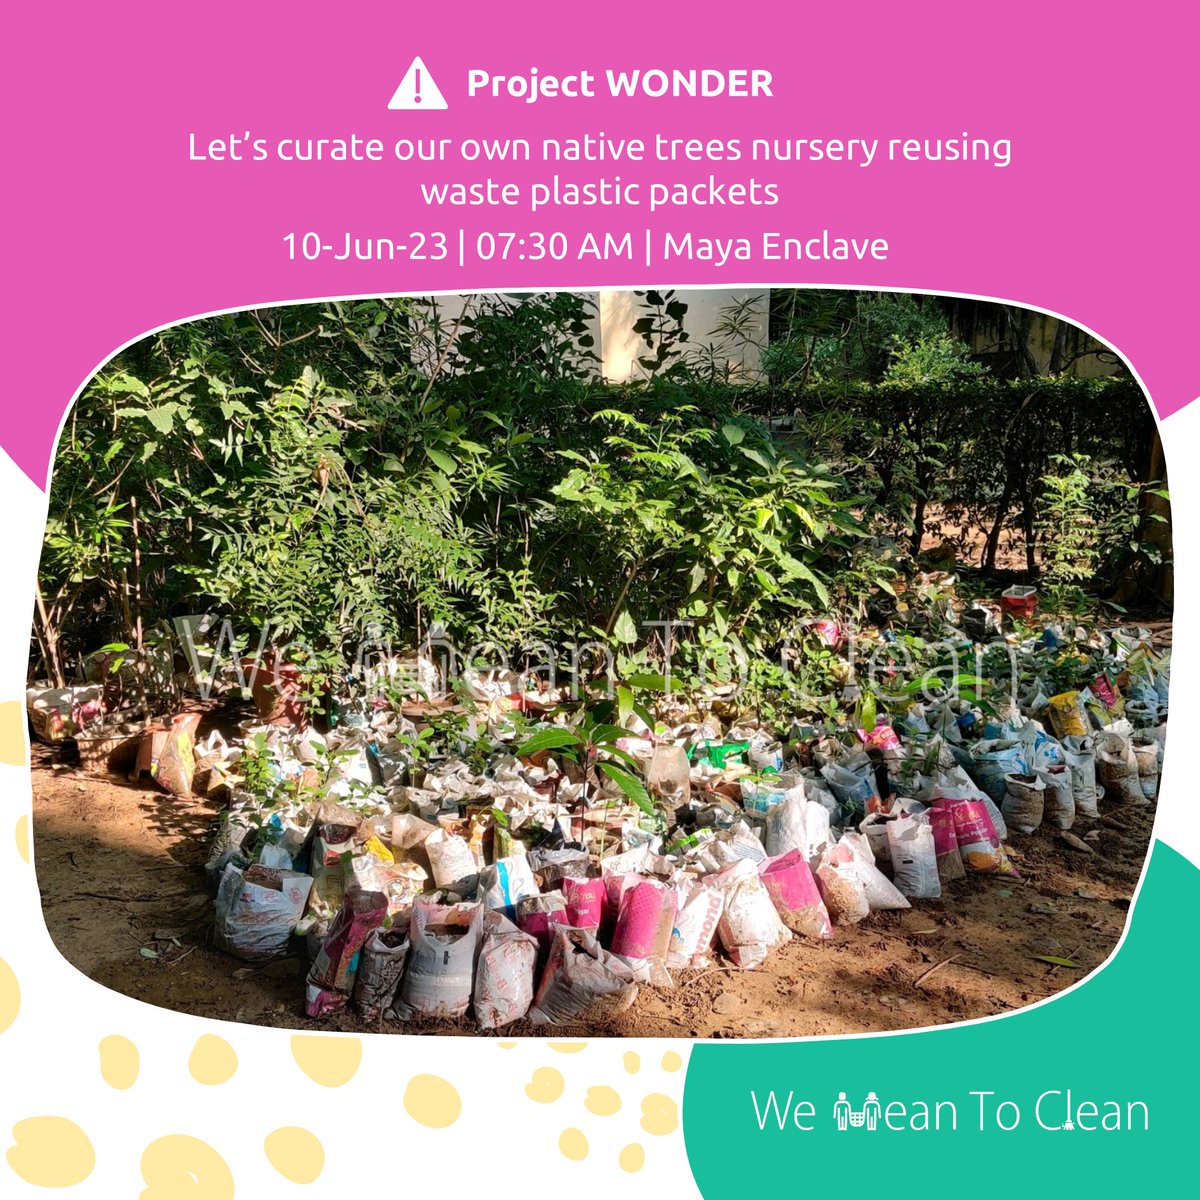 #ProjectWONDER
We're reusing waste plastic packets to create a native trees nursery
Join us!
Visit meetup.com/we-mean-to-cle…

#WeMeanToClean #CleanDelhi #SwachhBharat #MyCleanIndia #AirPollution #DelhiPollution #DelhiAirPollution #Reuse #WasteManagement #ClimateActionNow